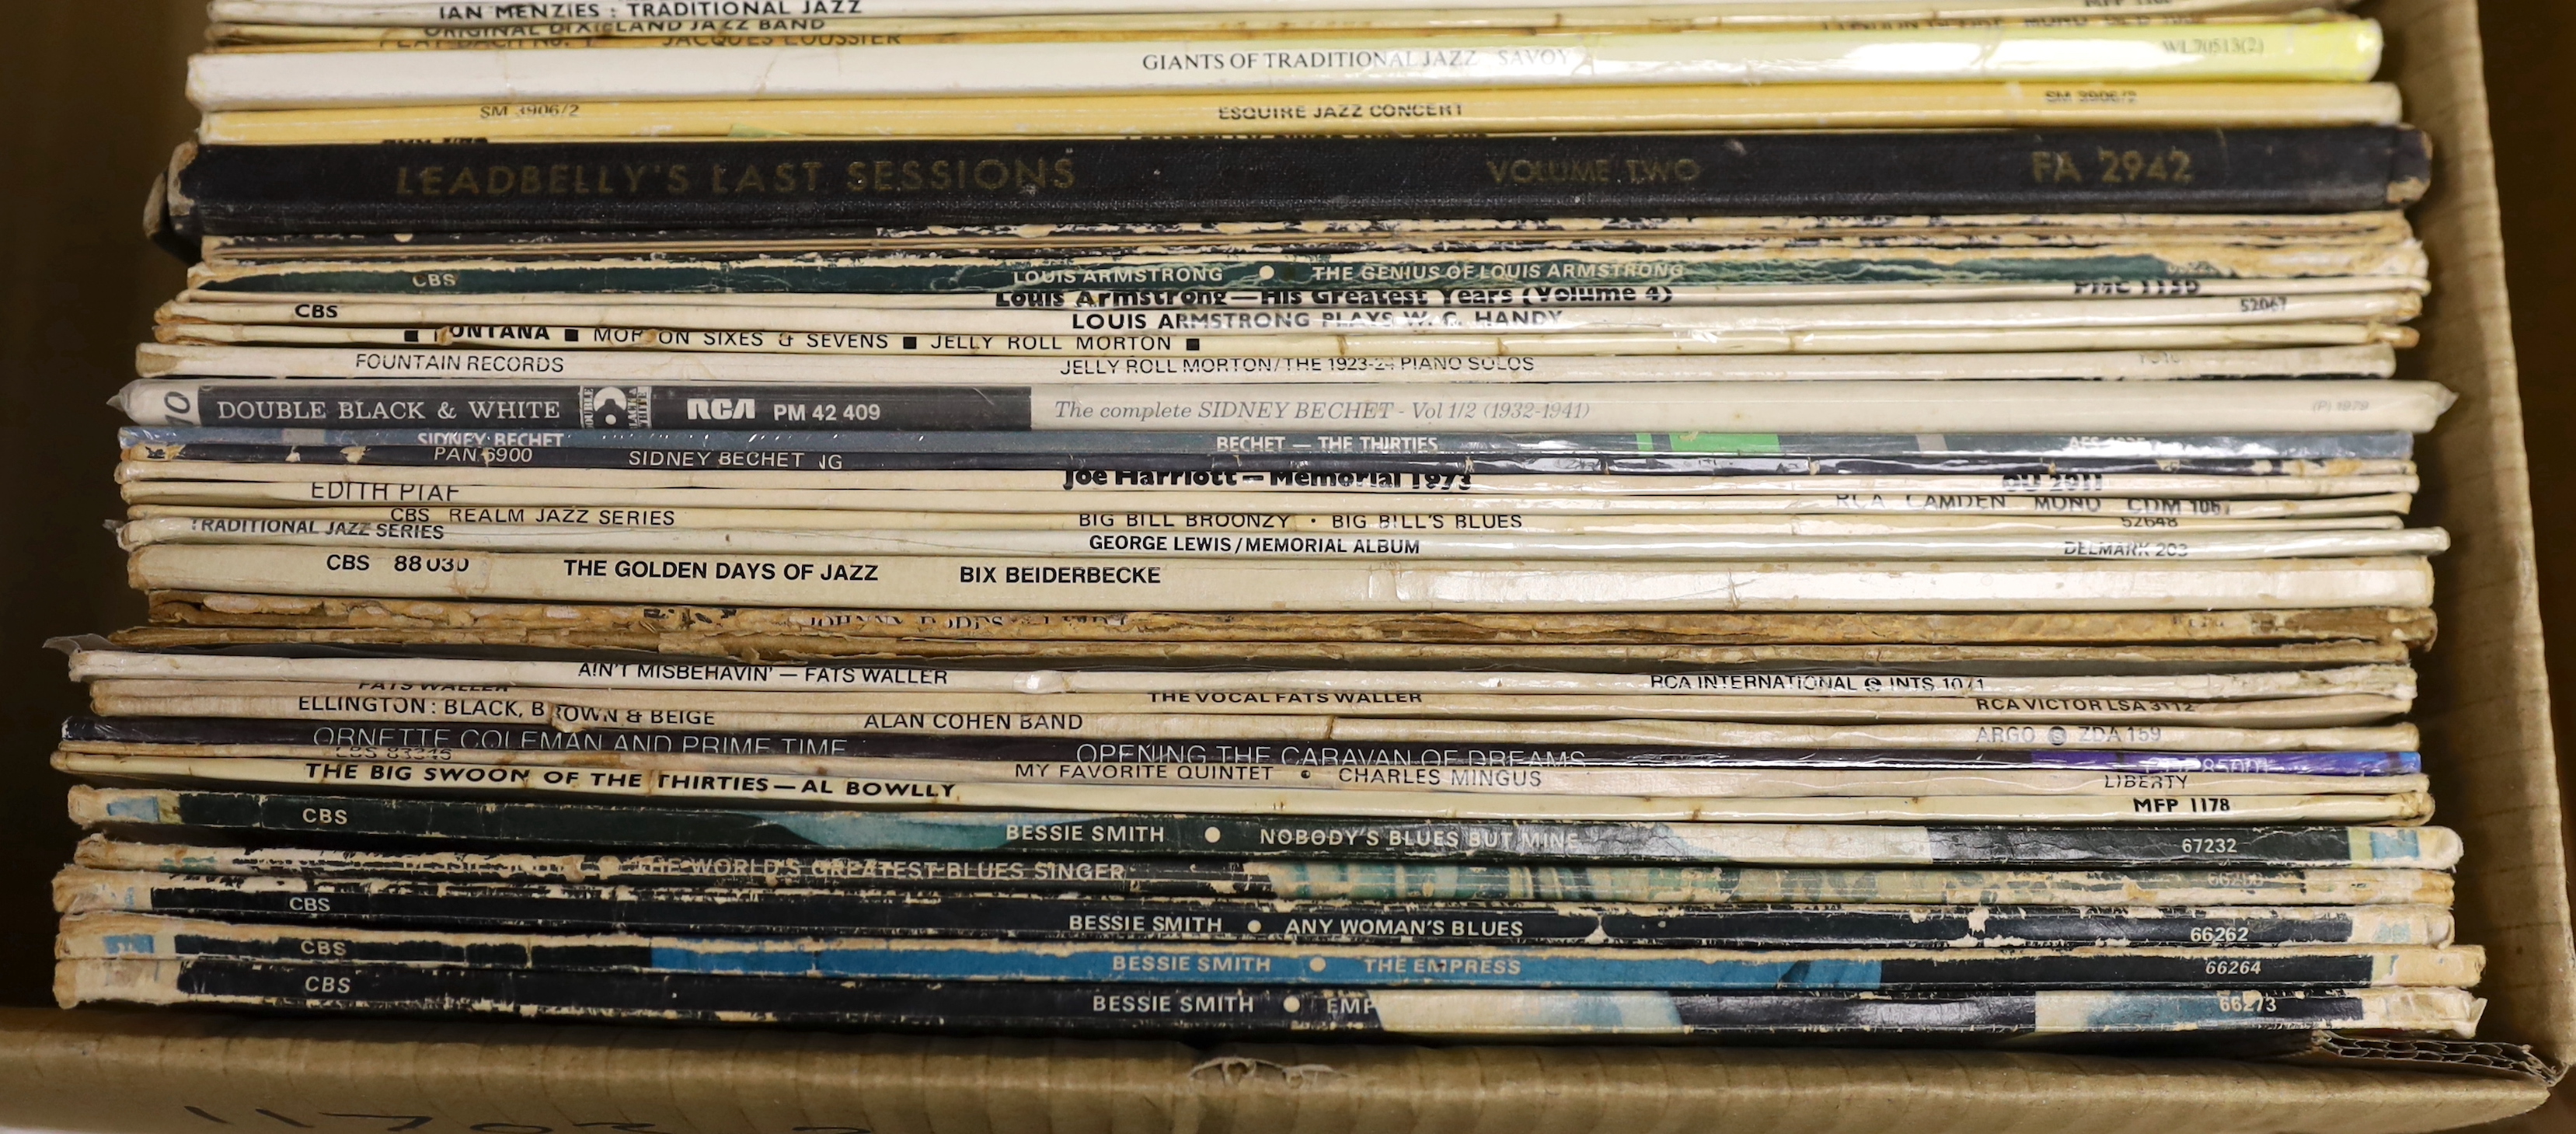 Forty-six Jazz LPs including, Bessie Smith, Charlie, Mingus, Ornette Coleman, Fats Waller, Bix Beiderbecke, Jelly Roll Morton, Louis Armstrong, Leadbelly, Ian Menzies, etc. together with six 10 inch LPs, etc.